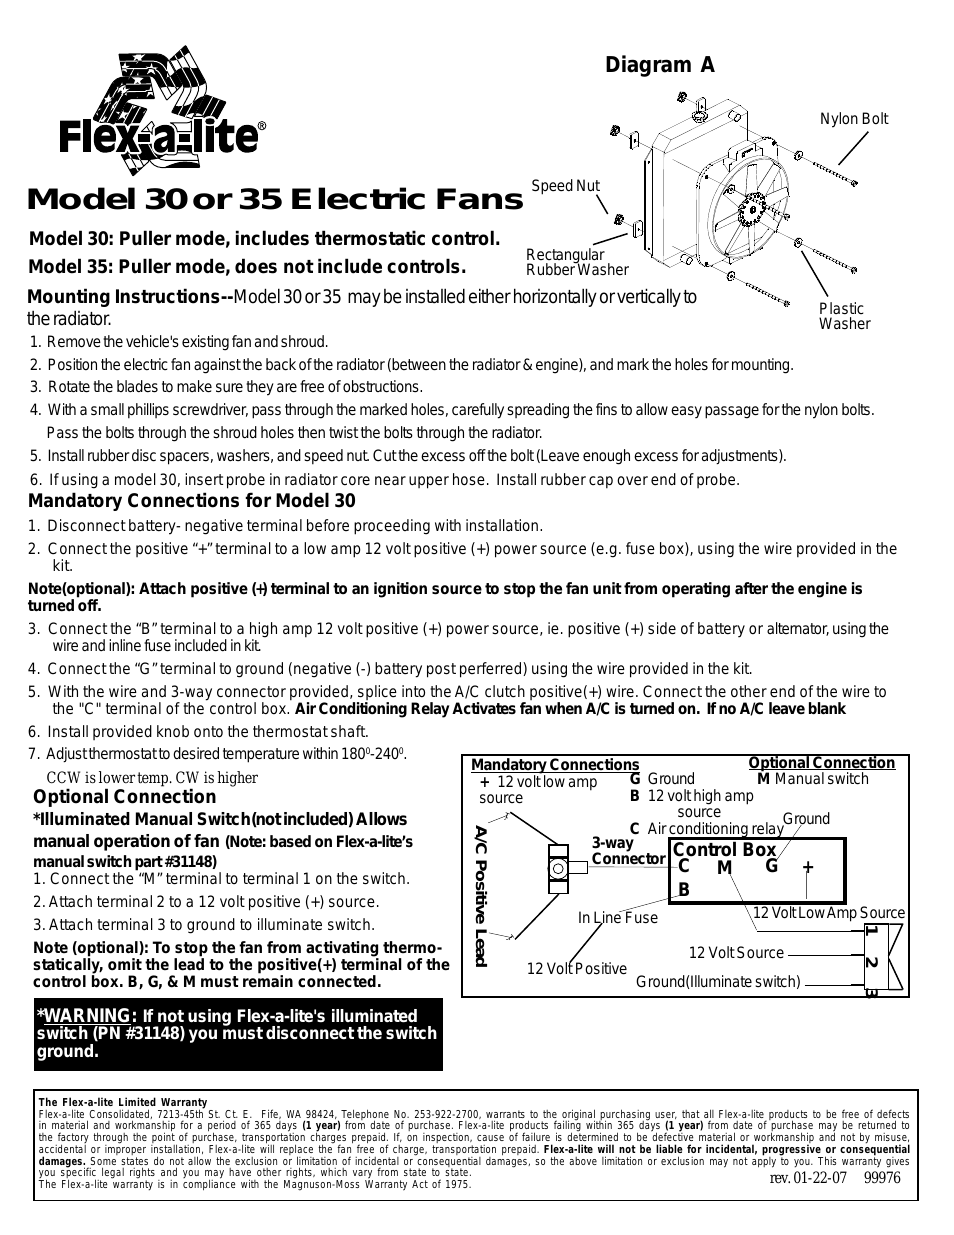 35 Electric Fans: Puller mode, does not include controls